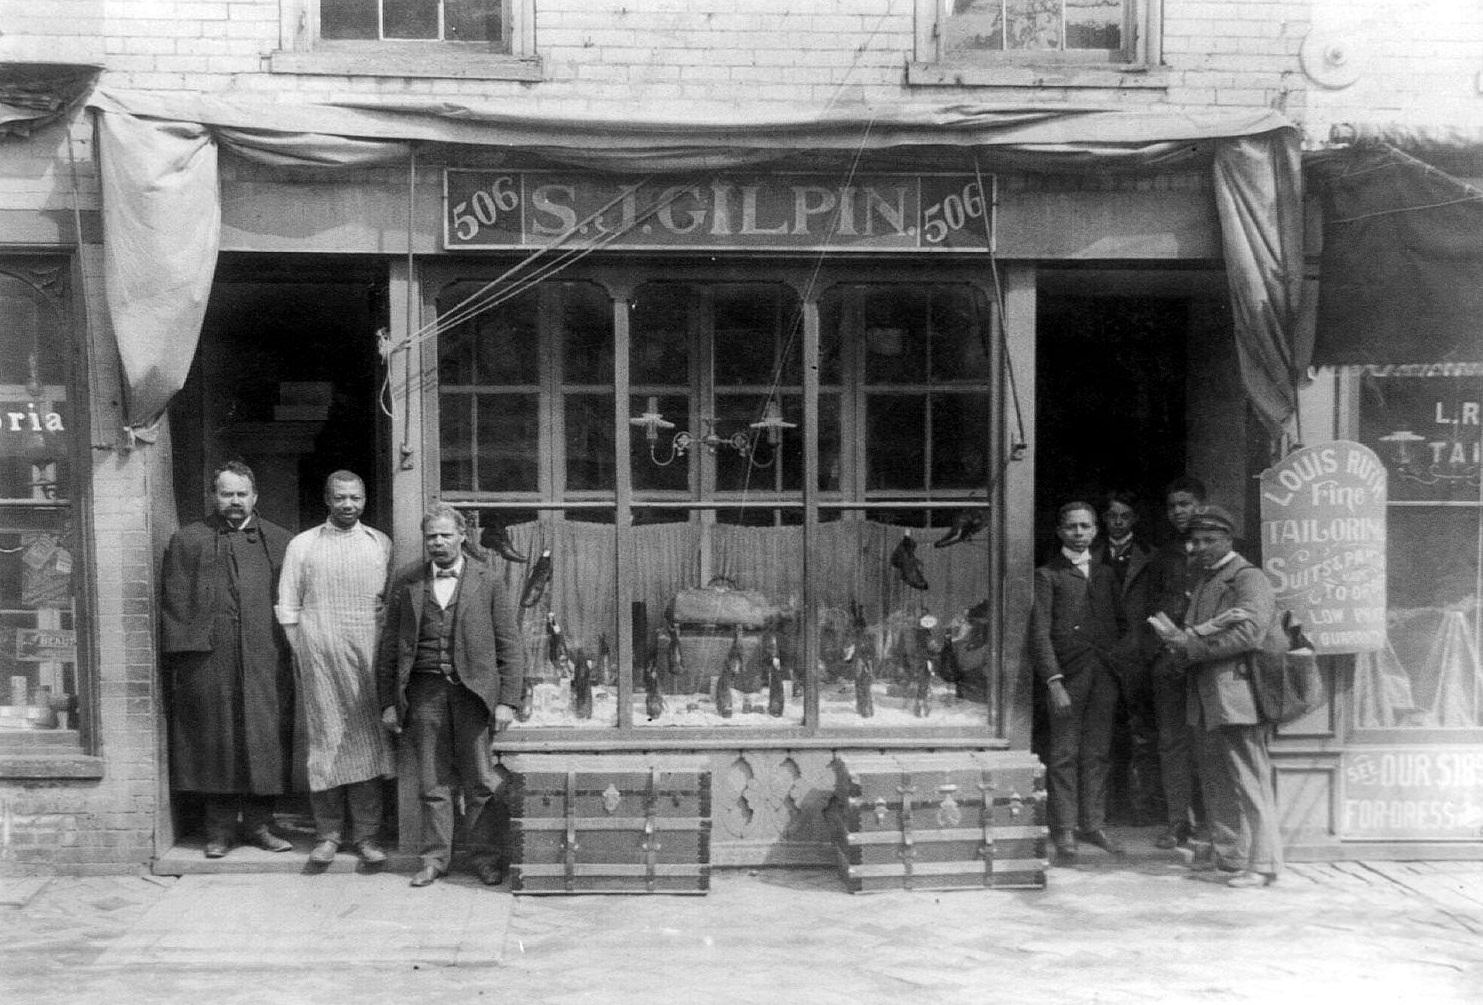 Mail carrier and six other men posed standing at entrance to shop. S.J. Gilpin shoe store, Richmond, 1900